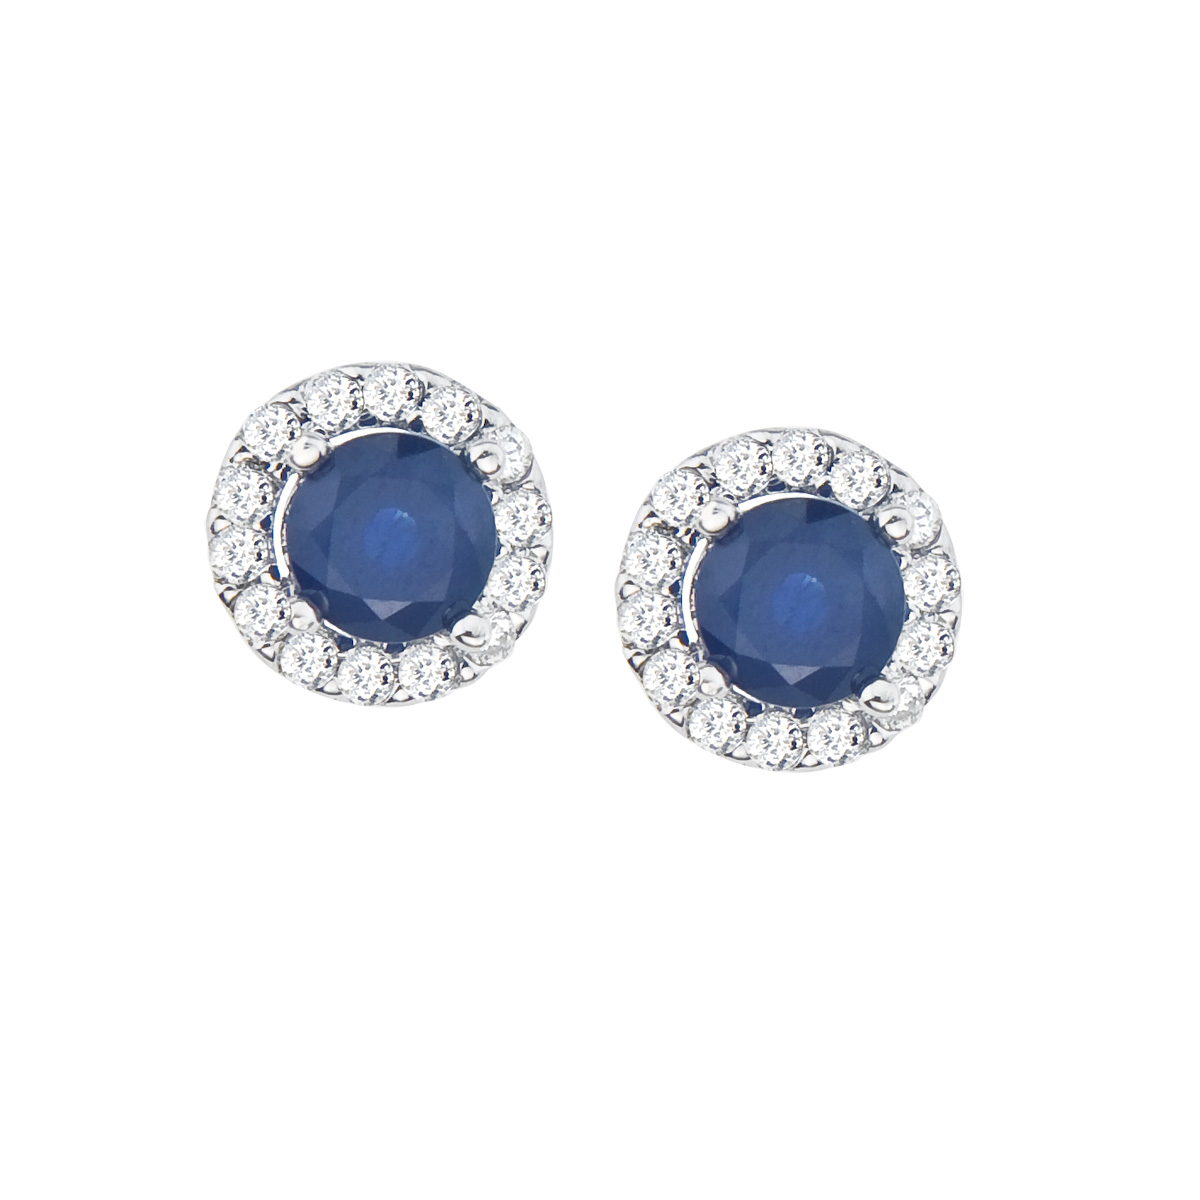 Classicly beautiful halo earrings with bright 5 mm sapphire center stones surrounded by .34 total...